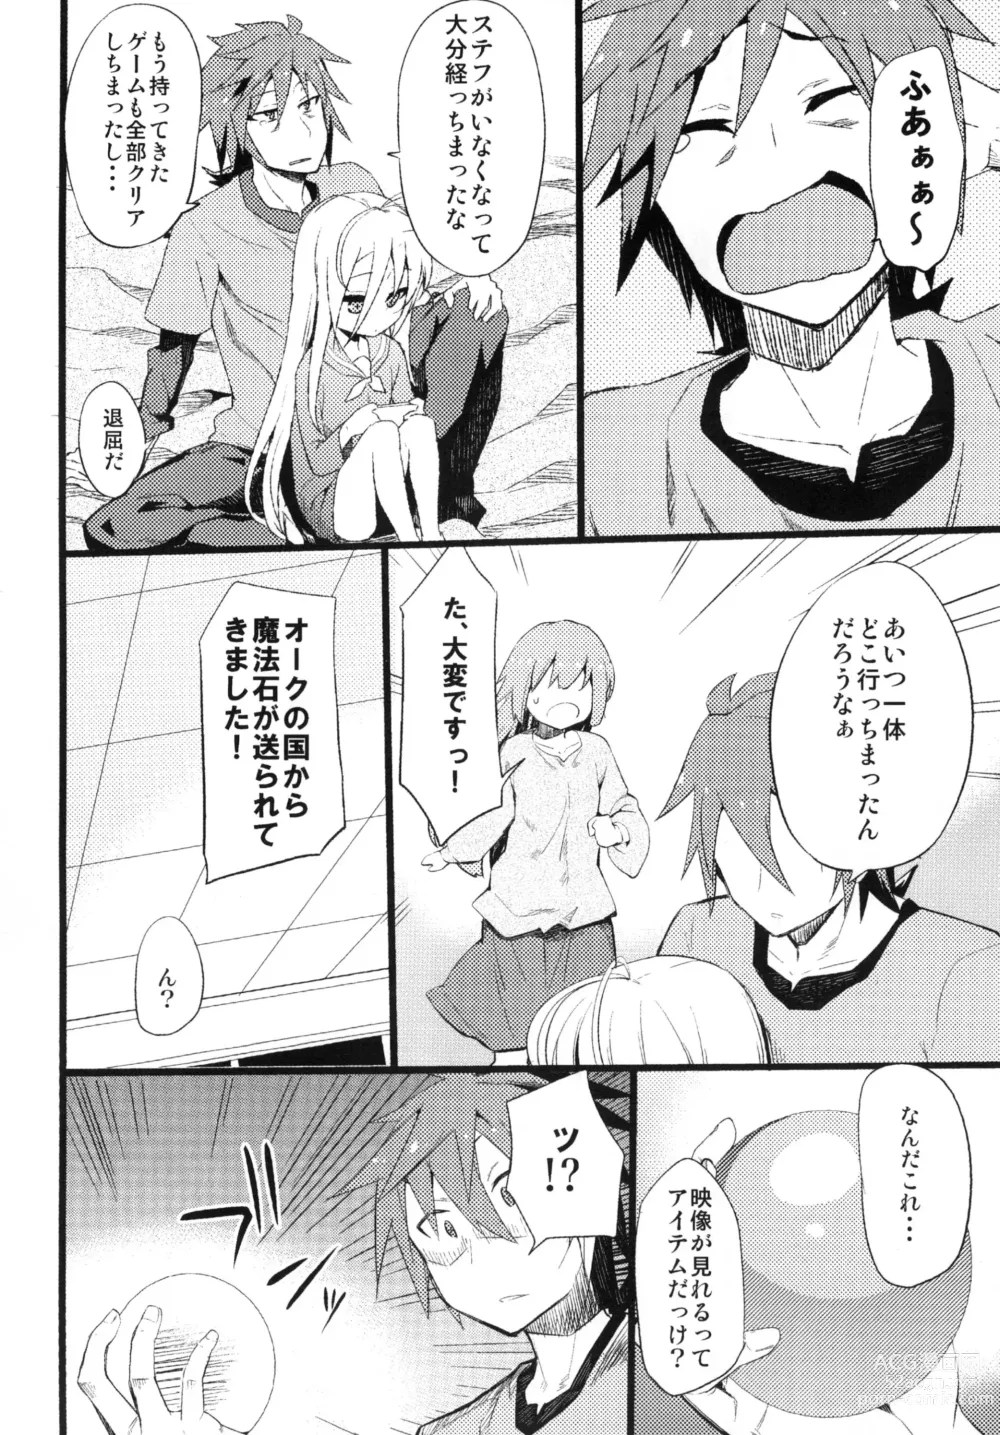 Page 31 of doujinshi Steph Game